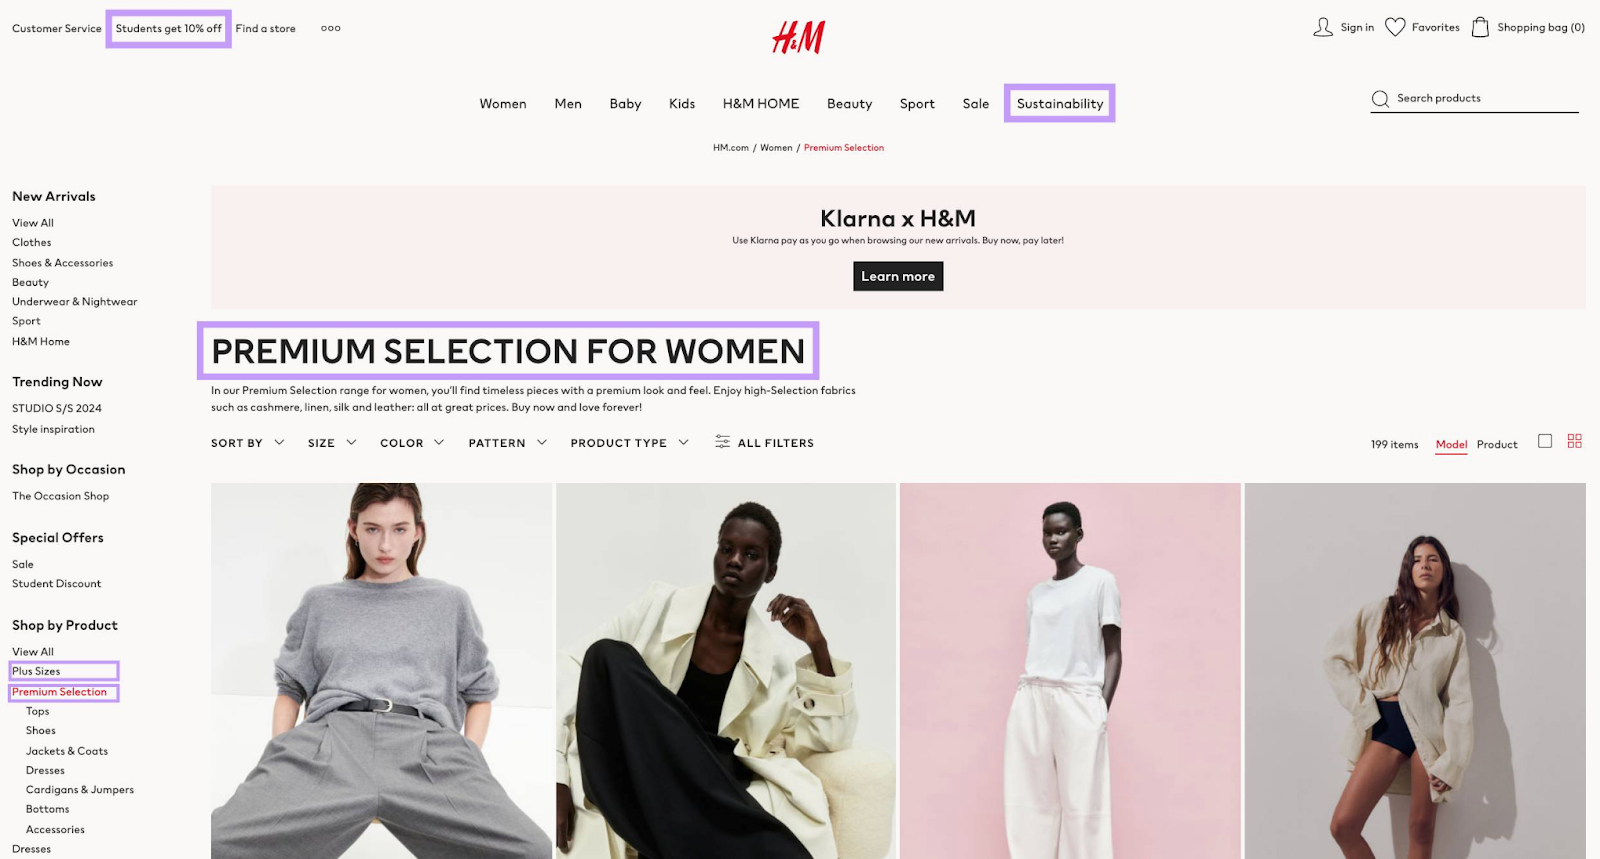 H&M’s premium collection for women